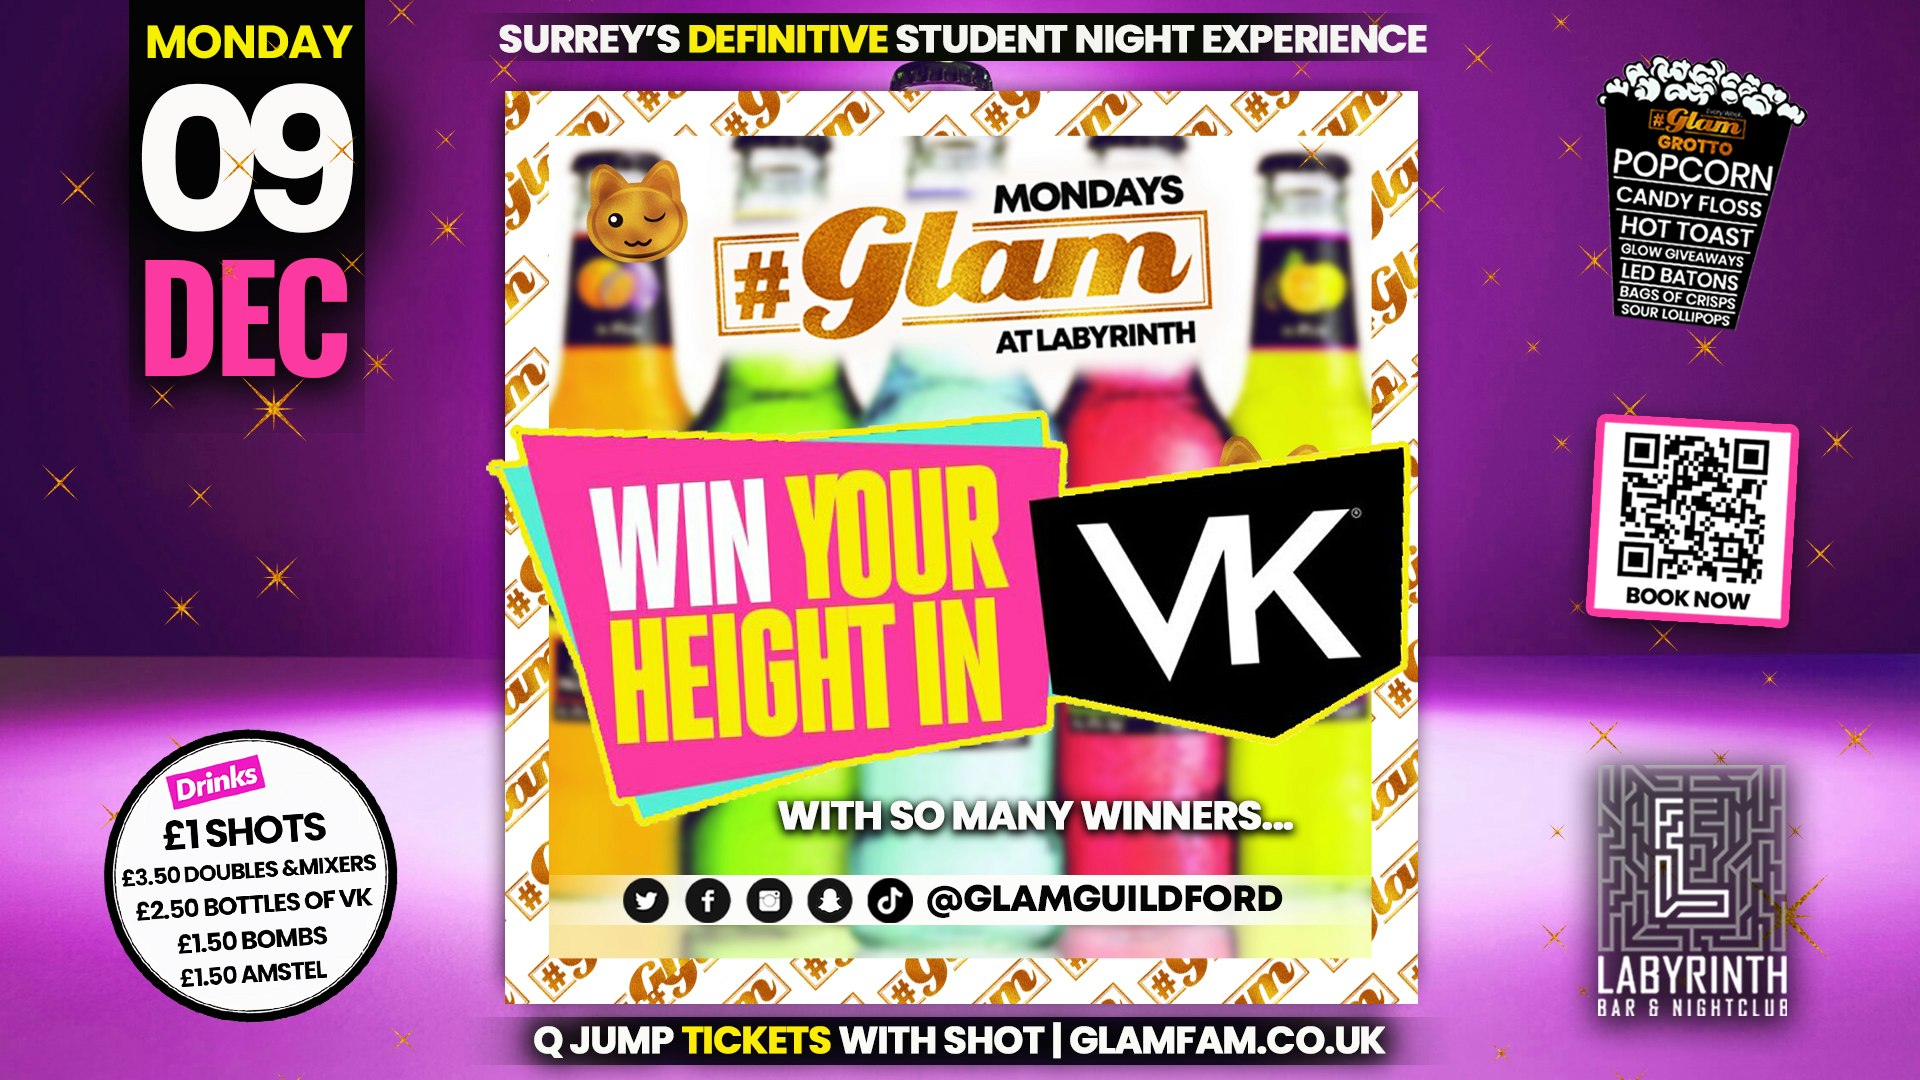 Glam – 😲 WIN YOUR HEIGHT IN VK!! 😲 Surrey’s Wildest Student Events! Mondays at Labs 😻